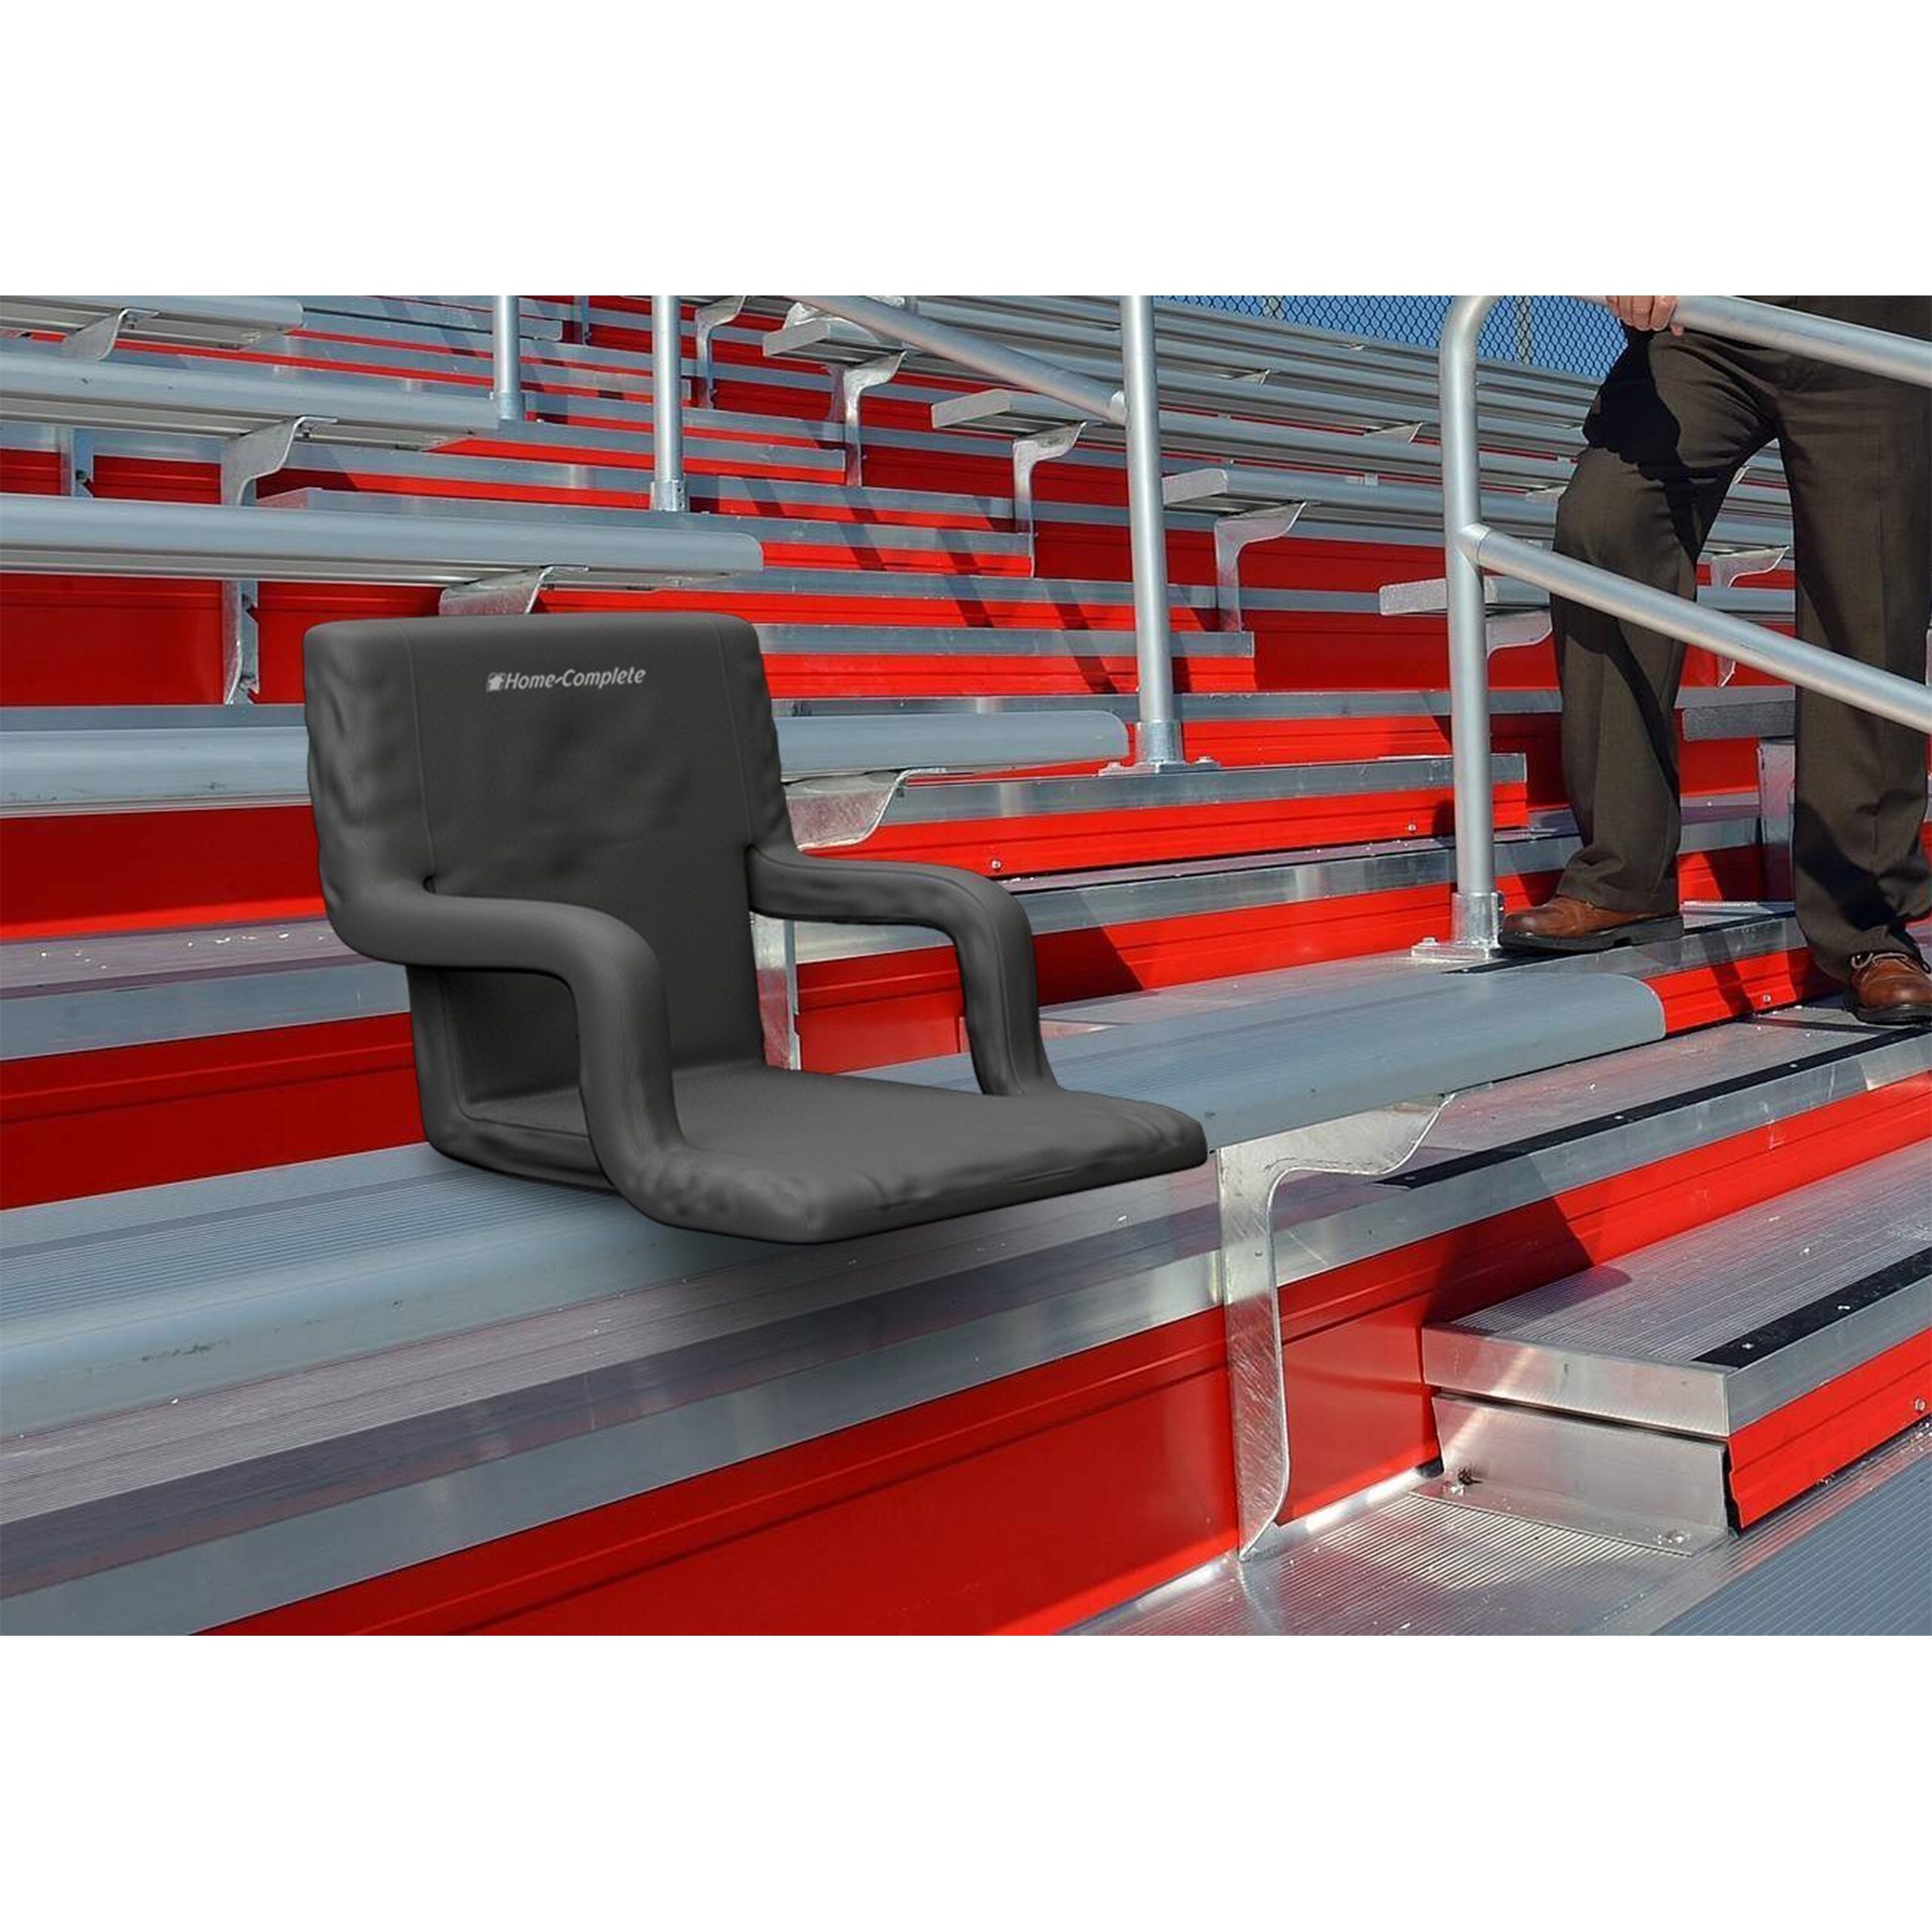 https://ak1.ostkcdn.com/images/products/is/images/direct/e8df7f20ea1a957adbac2e5a379d82802abcf3ba/Set-of-2-Wide-Stadium-Seats---Bleacher-Cushion-Set-with-Padded-Back-Support-Armrests-by-Home-Complete.jpg